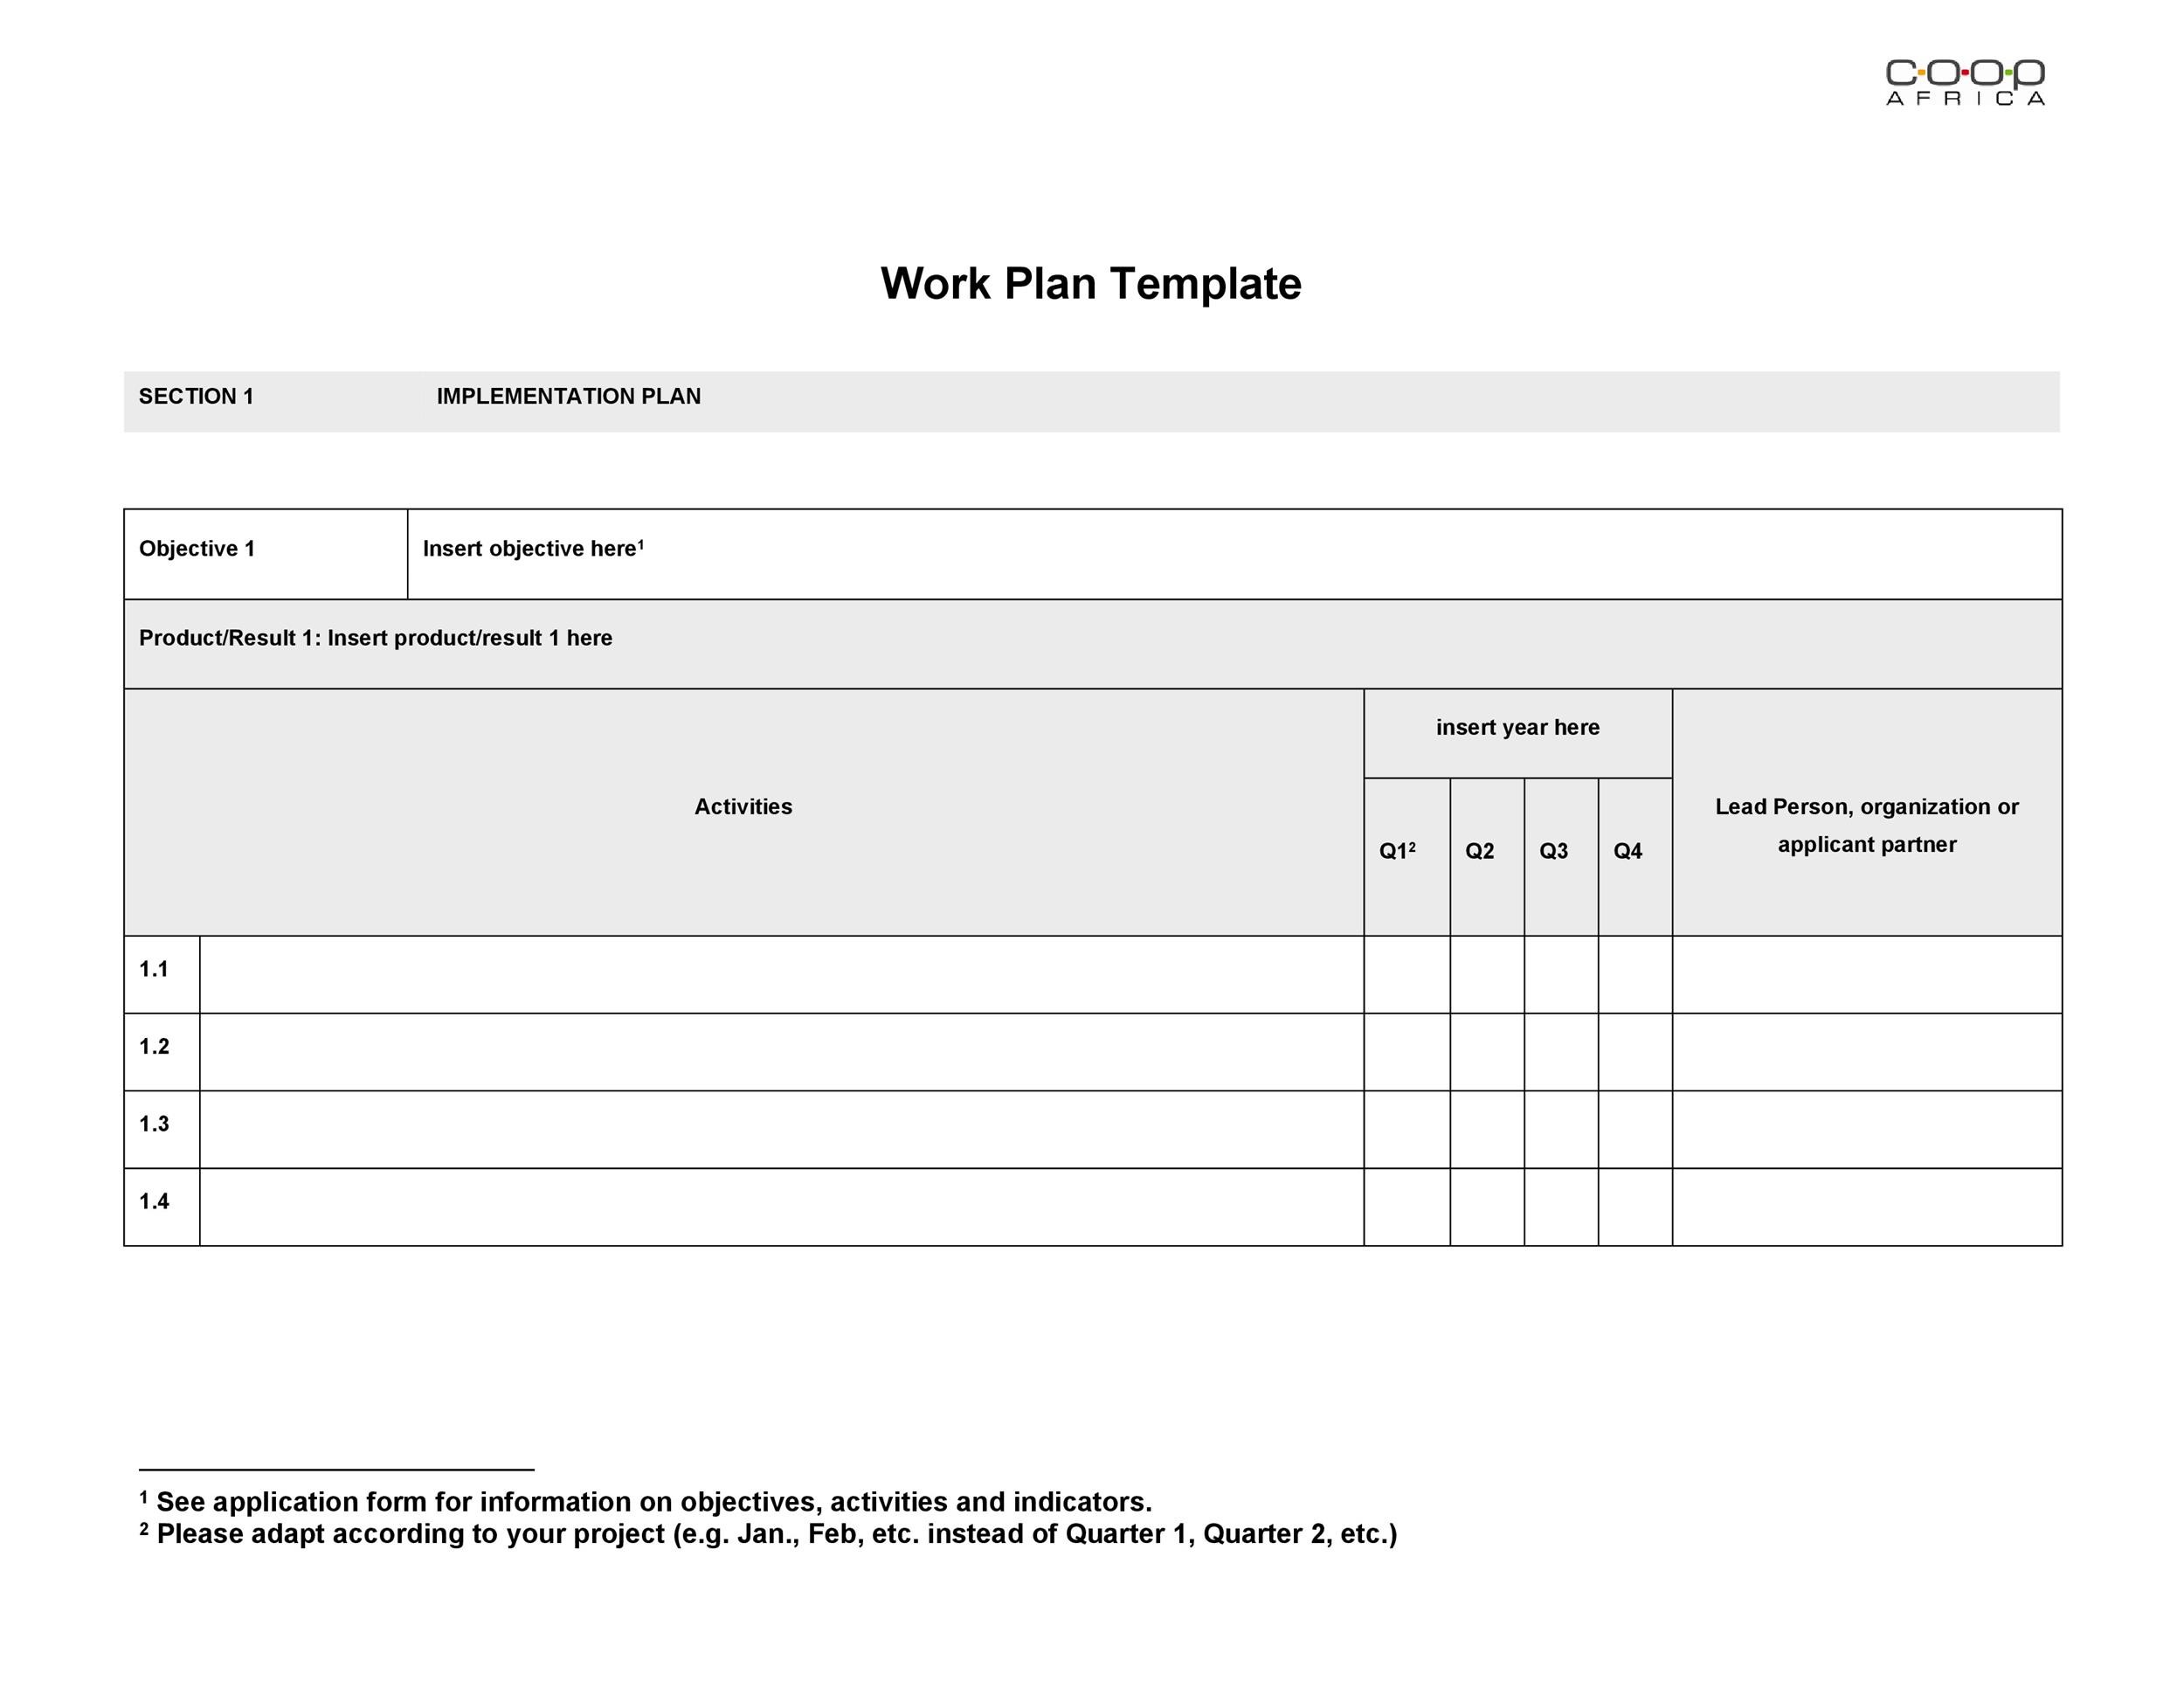 employee-work-plan-template-word-tutore-org-master-of-documents